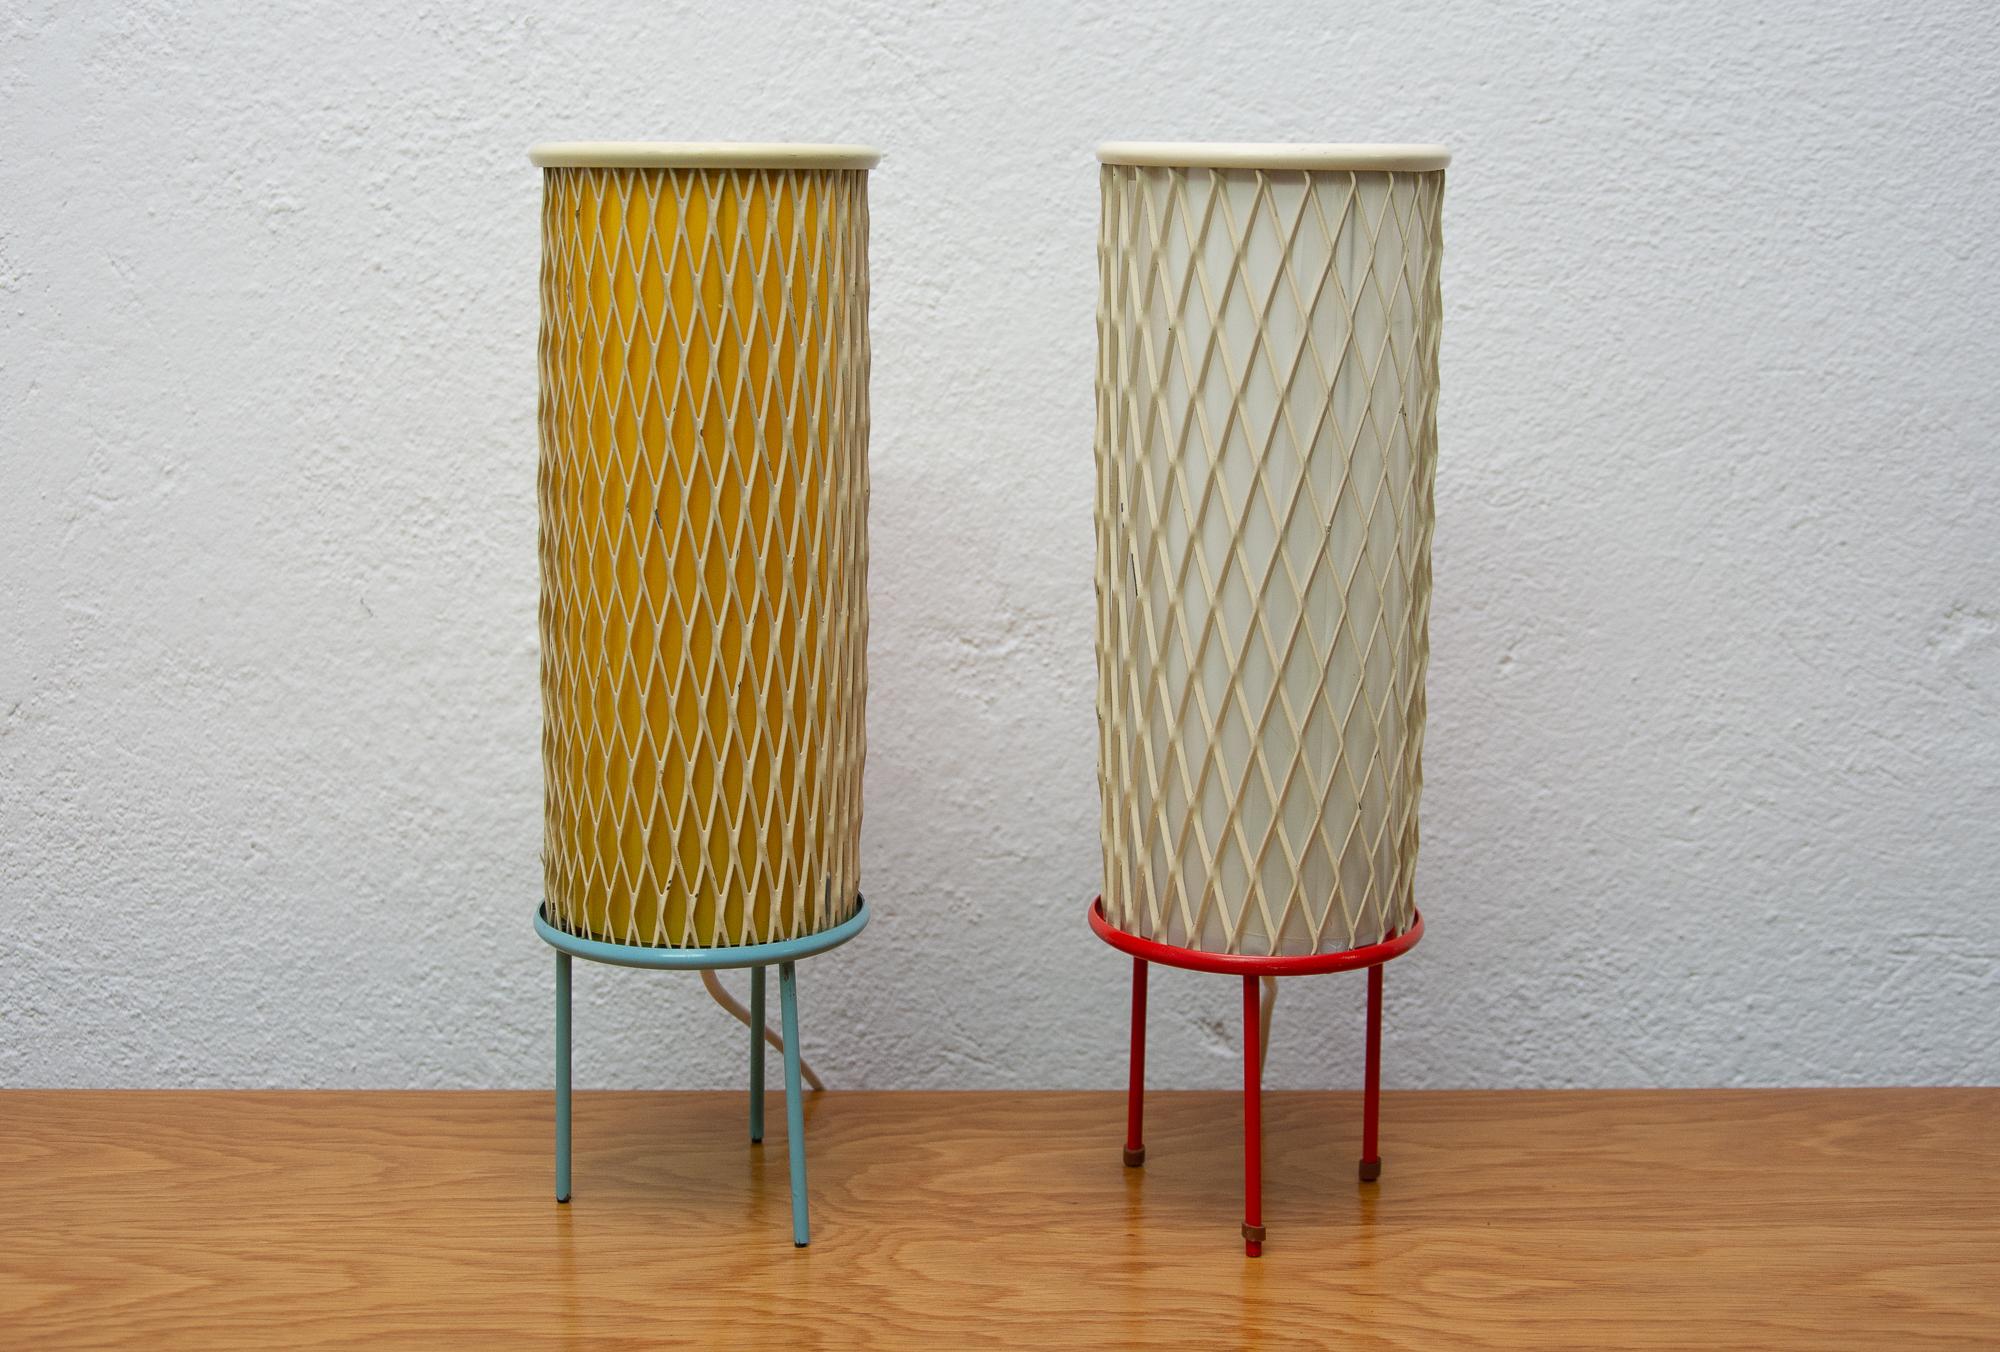 20th Century Pair of Midcentury Rocket Table Lamps by Josef Hůrka for Napako, 1960s, Czech